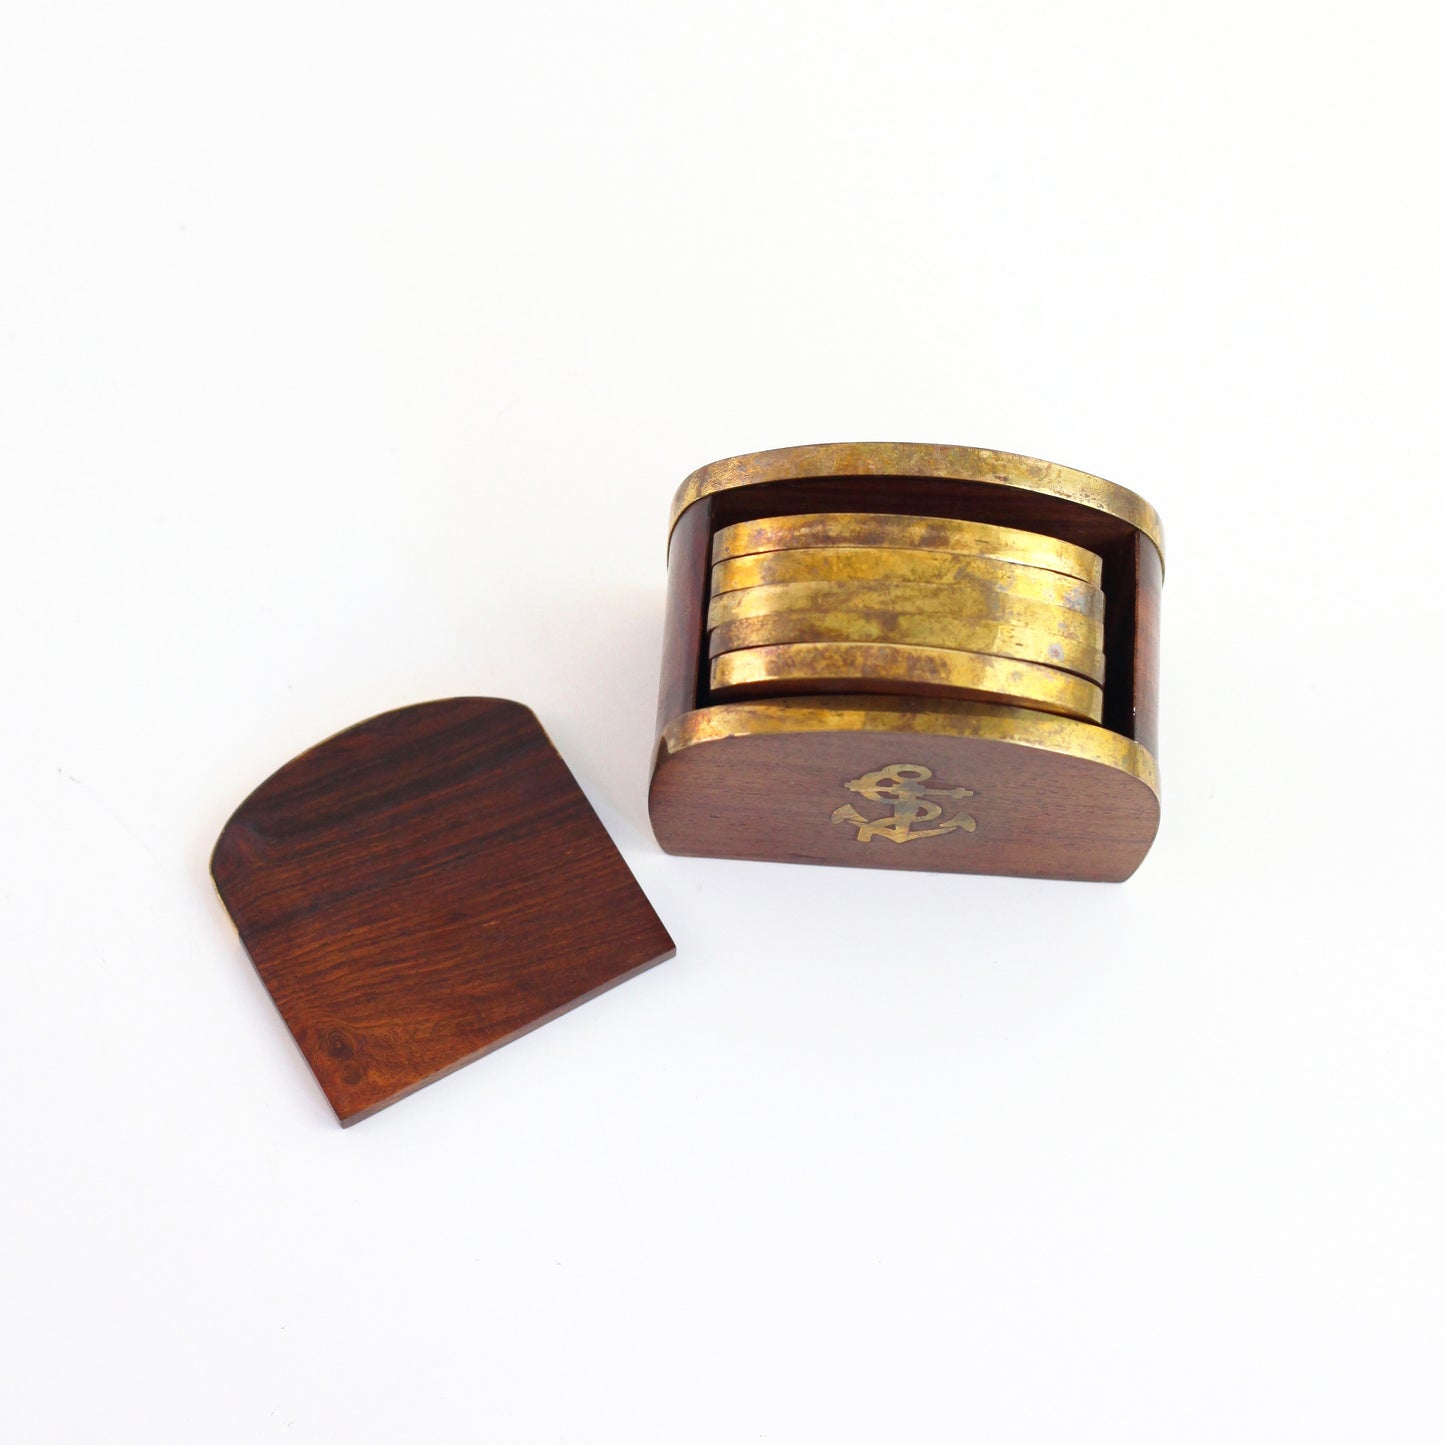 SOLD - Vintage Wood and Brass Anchor Drink Coasters Set